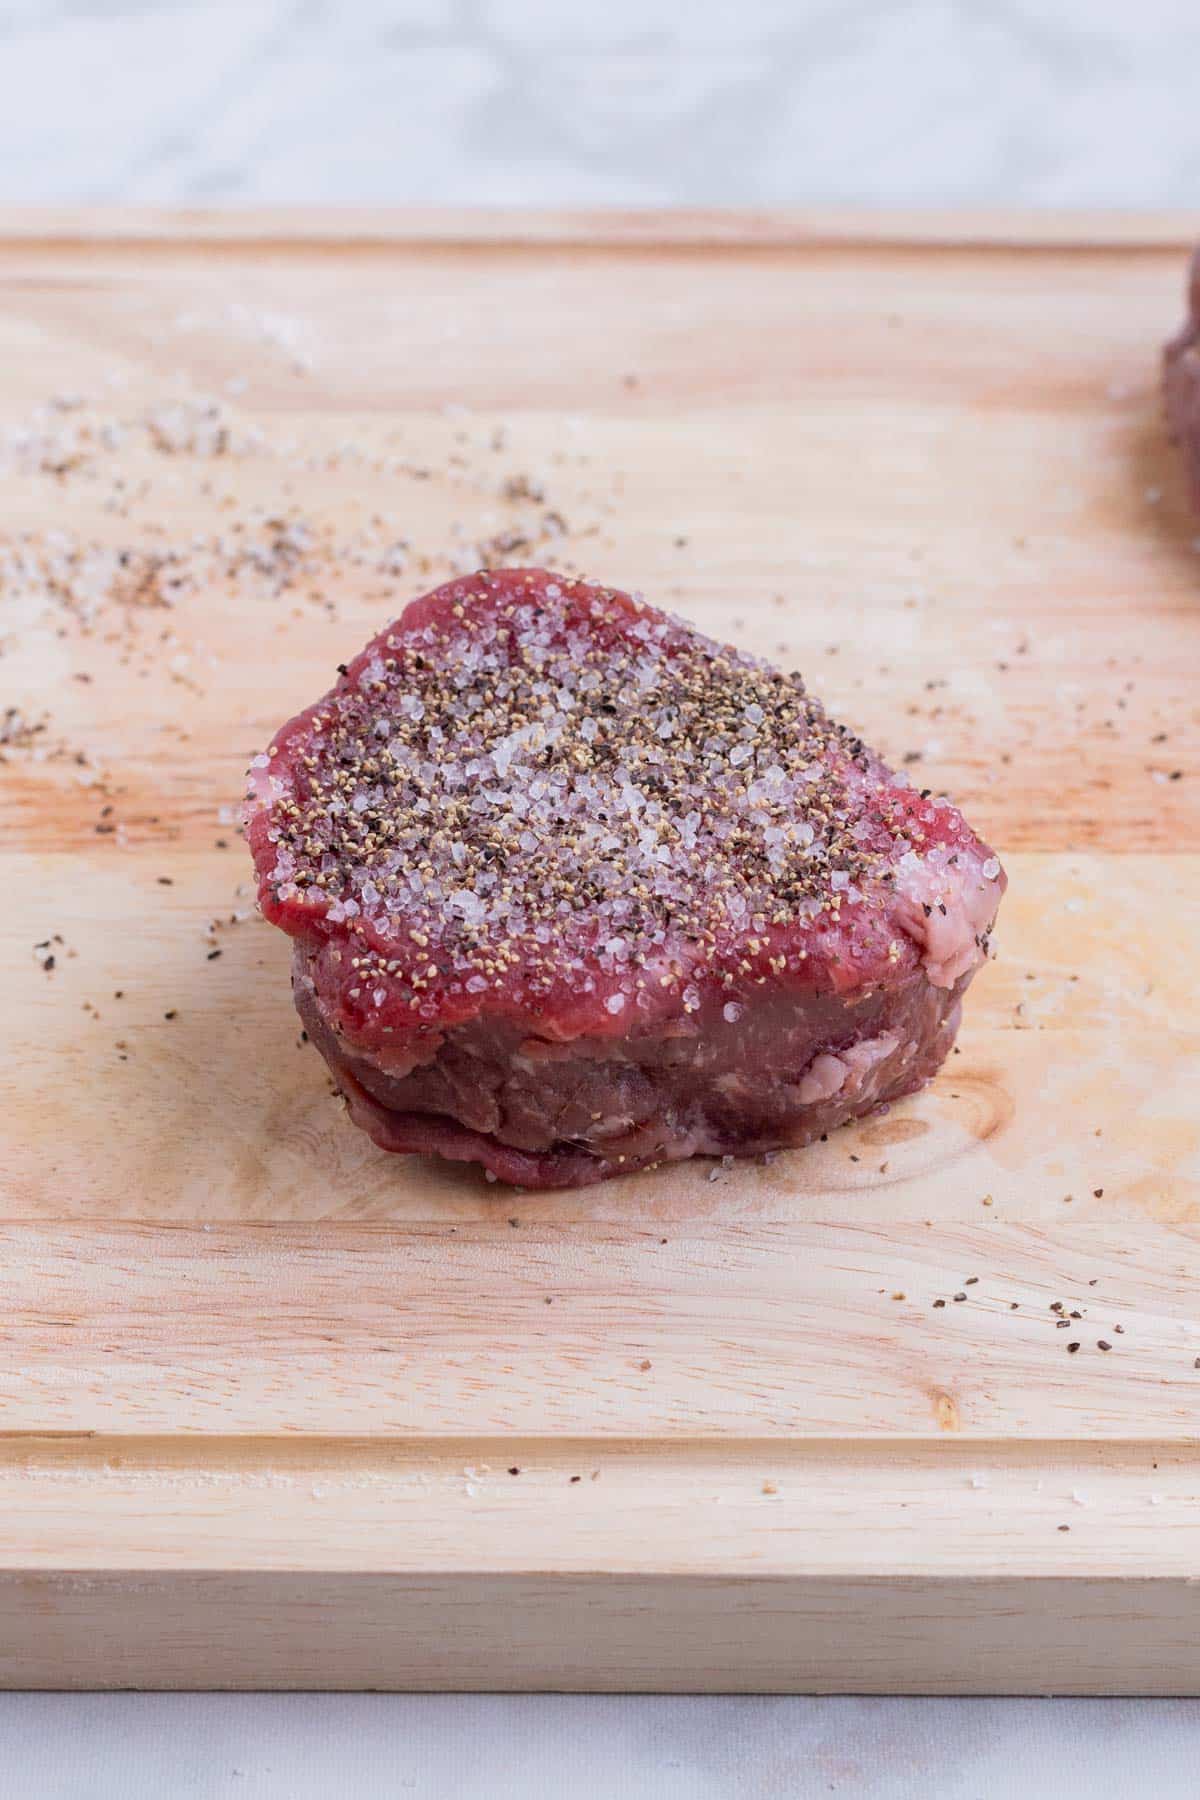 A filet mignon liberally seasoned with salt and pepper rests on a wooden cutting board.